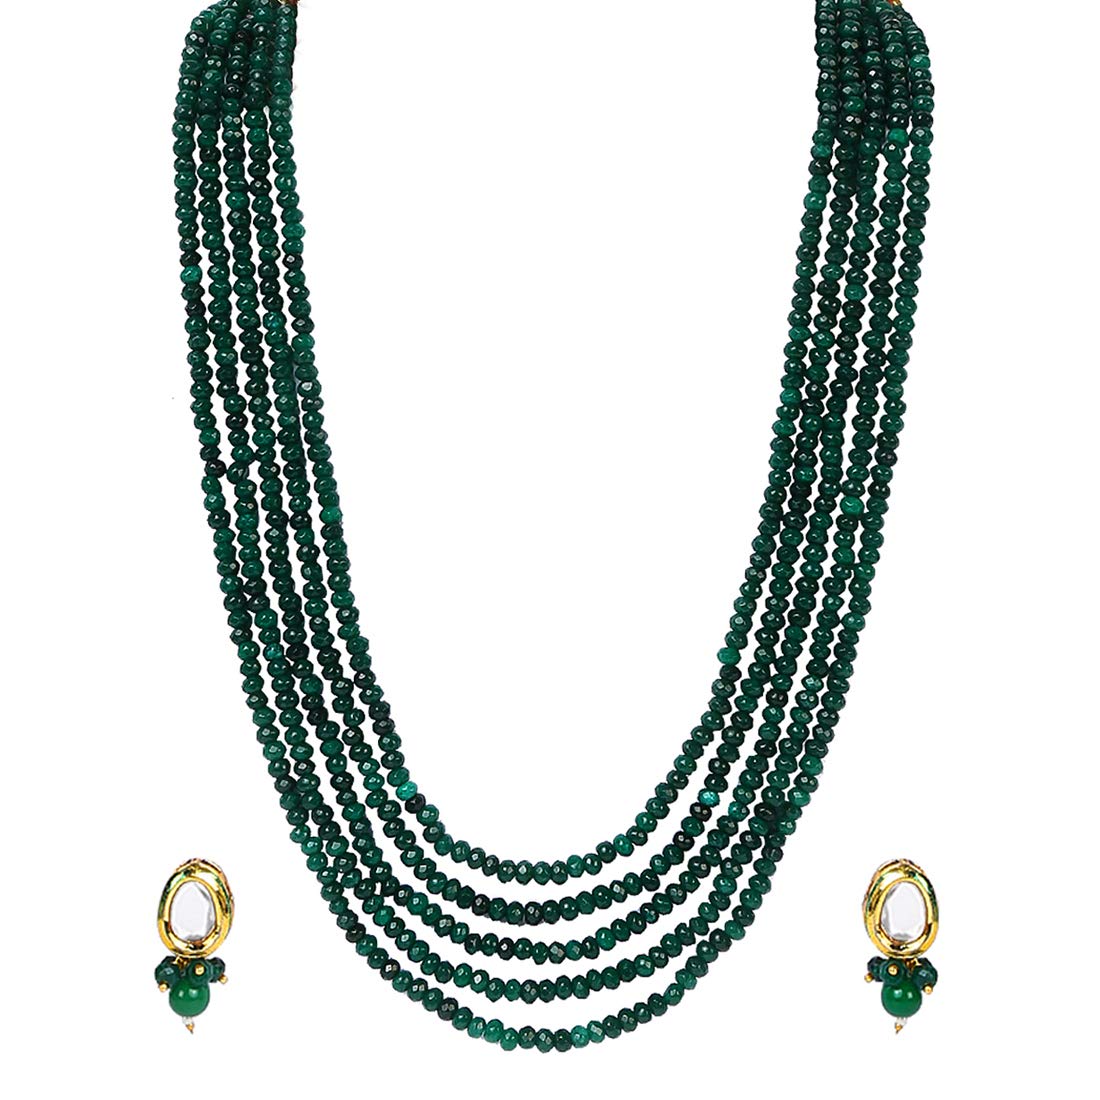 Yellow Chimes Classic Design Five Layers Emerald Green Onyx Stone Beads Semi Precious Gemstone Necklace Set with Earrings for Women & Girls